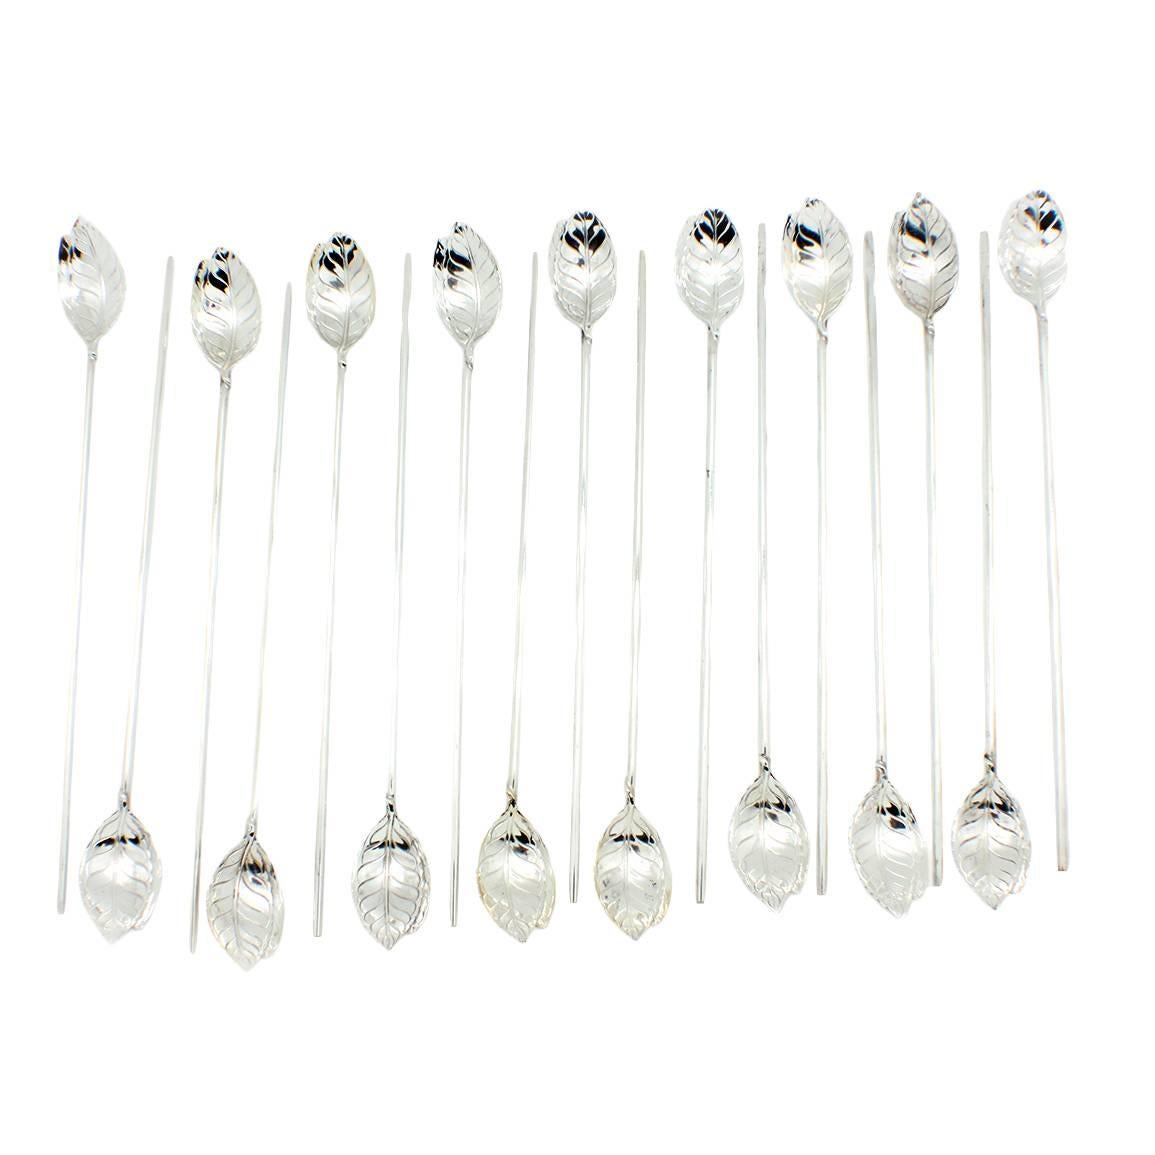 Tiffany & Co. Set of 17 Sterling Silver "Mint Julep" Spoons Straws